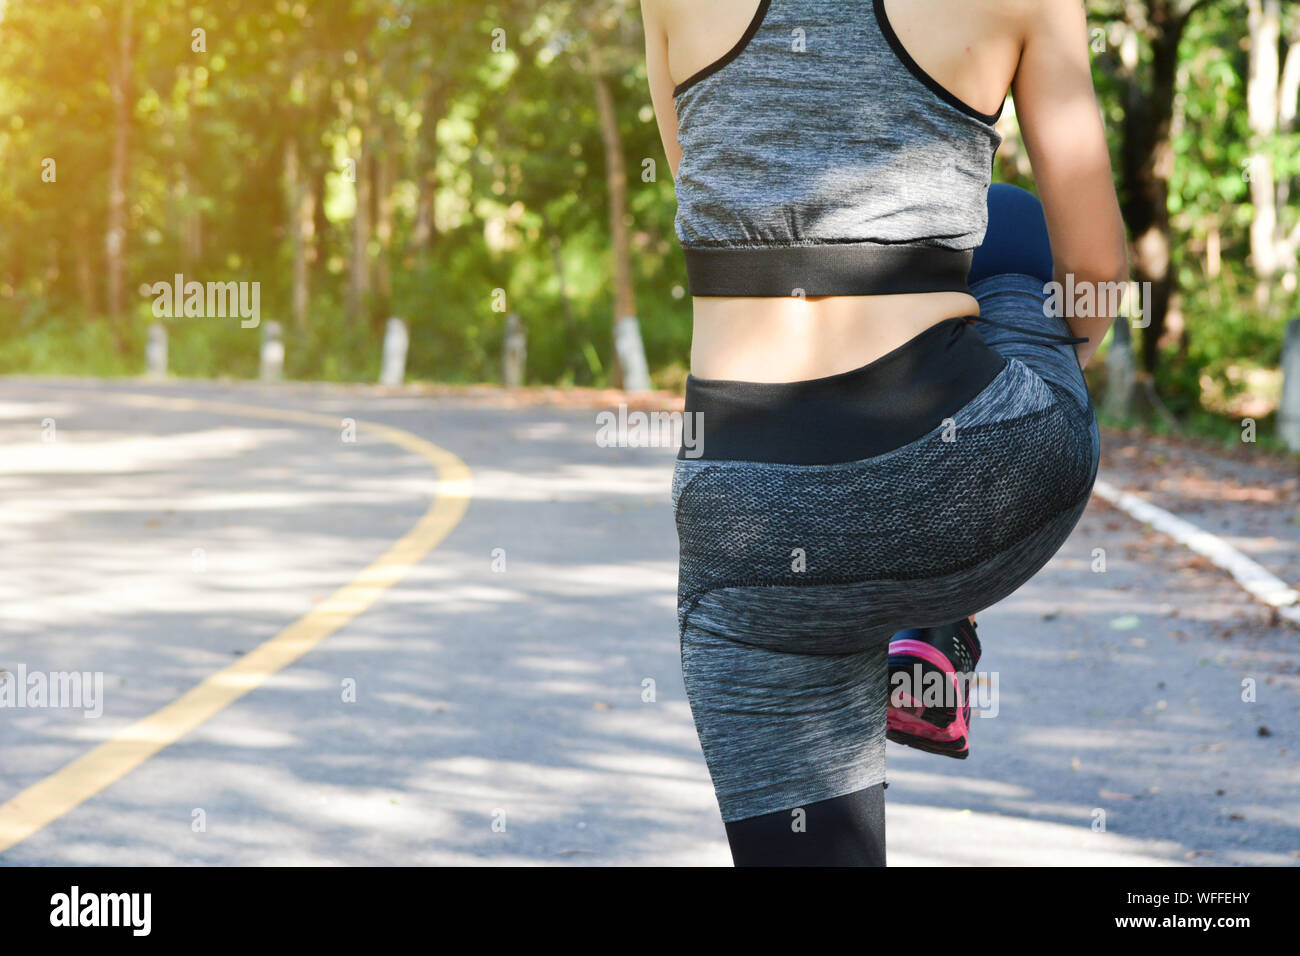 Midsection Of Woman With Sports Clothing Warming Up While Standing Outdoors Stock Photo